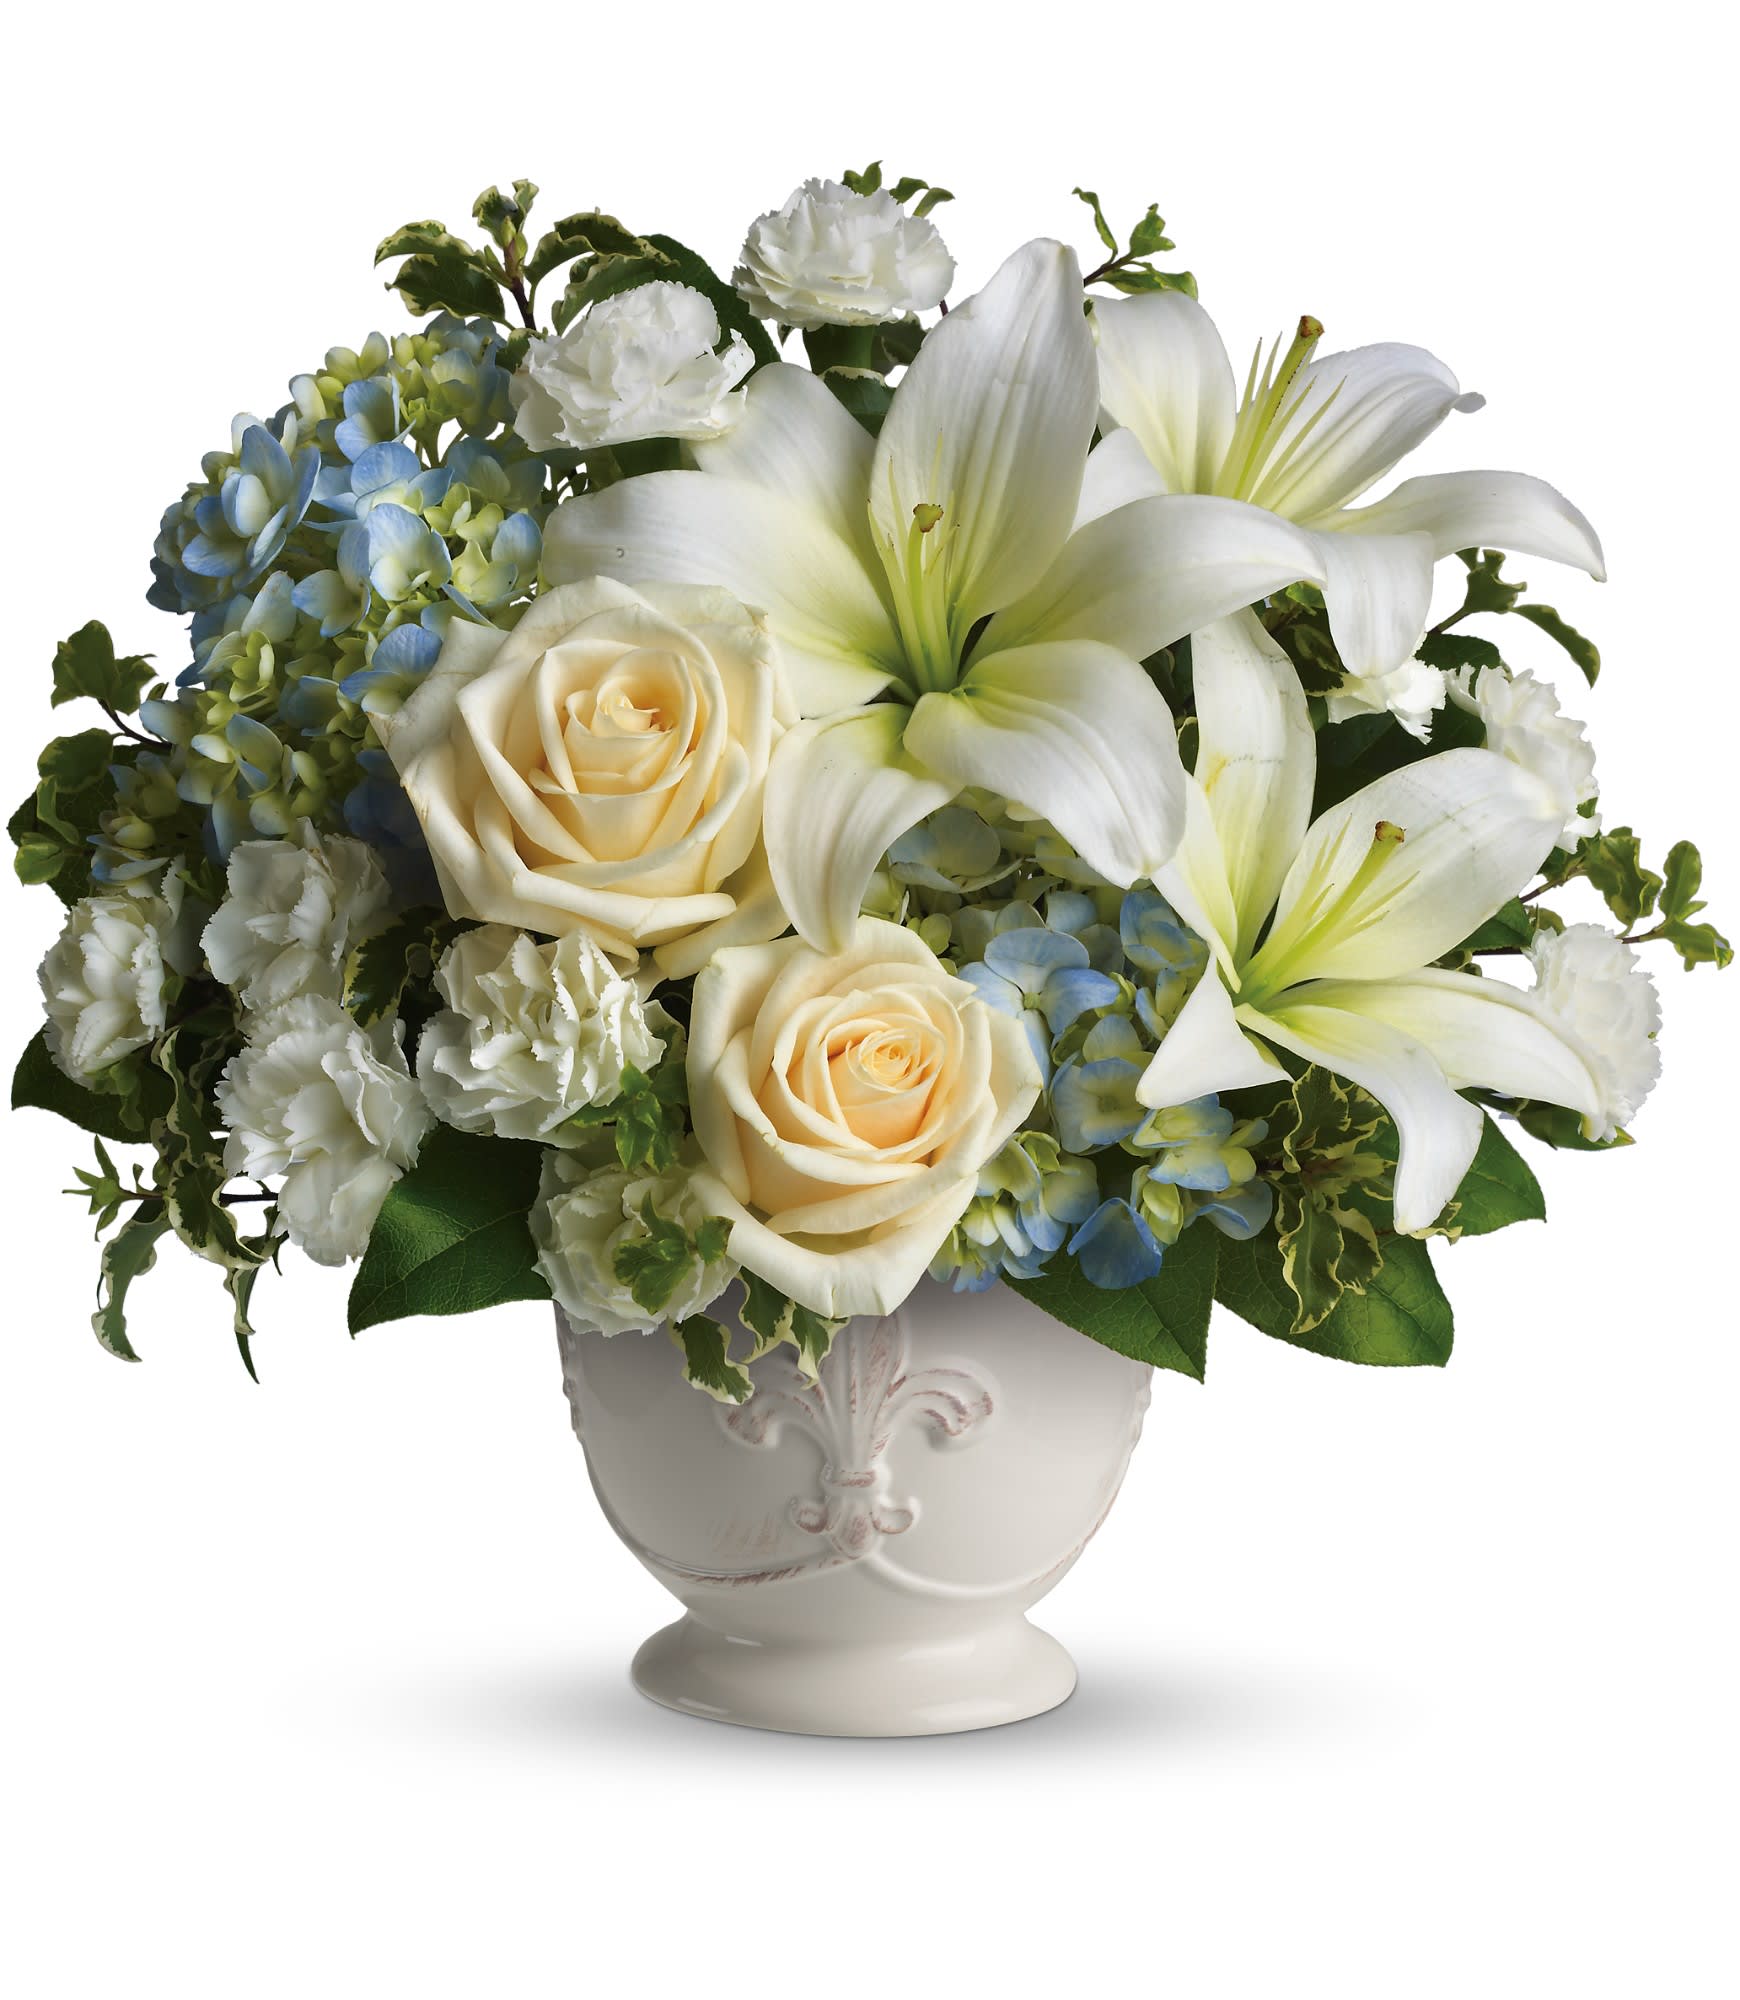 Beautiful Dreams by Teleflora - Soothing and respectful. Calm and compassionate. This beautiful collection of white and light colored blossoms will deliver your loving thoughts perfectly. 